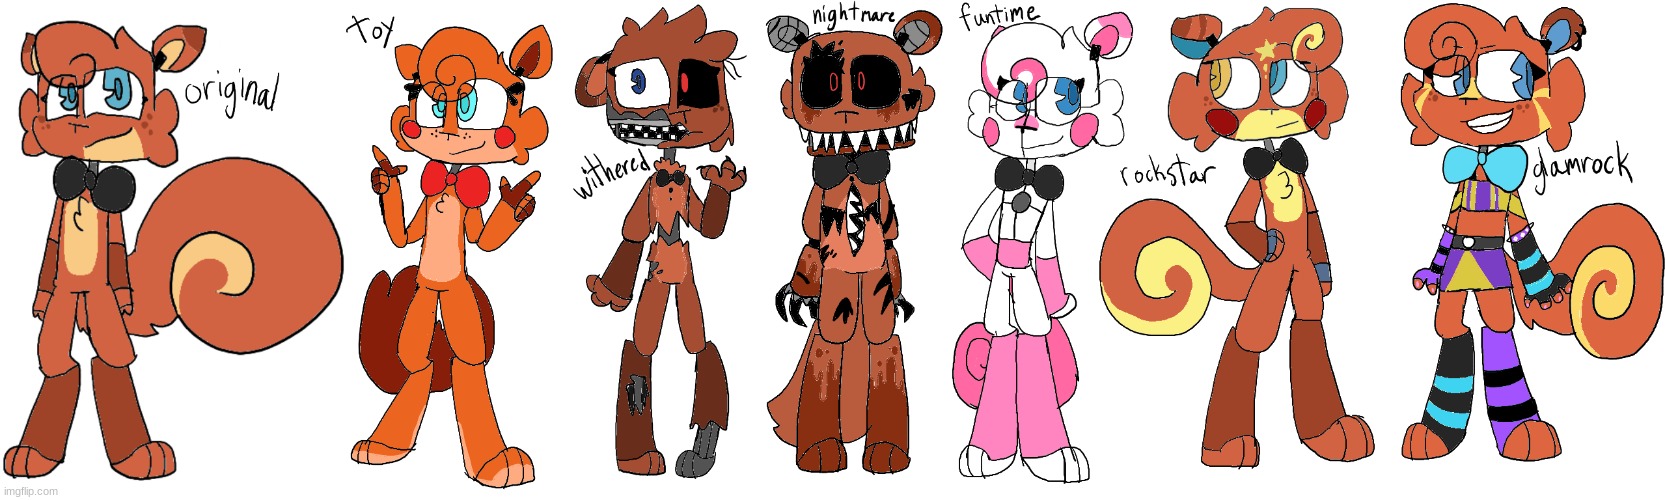 Every variation of Springy the Squirrel. No watermelon. | image tagged in fnaf,ocs | made w/ Imgflip meme maker